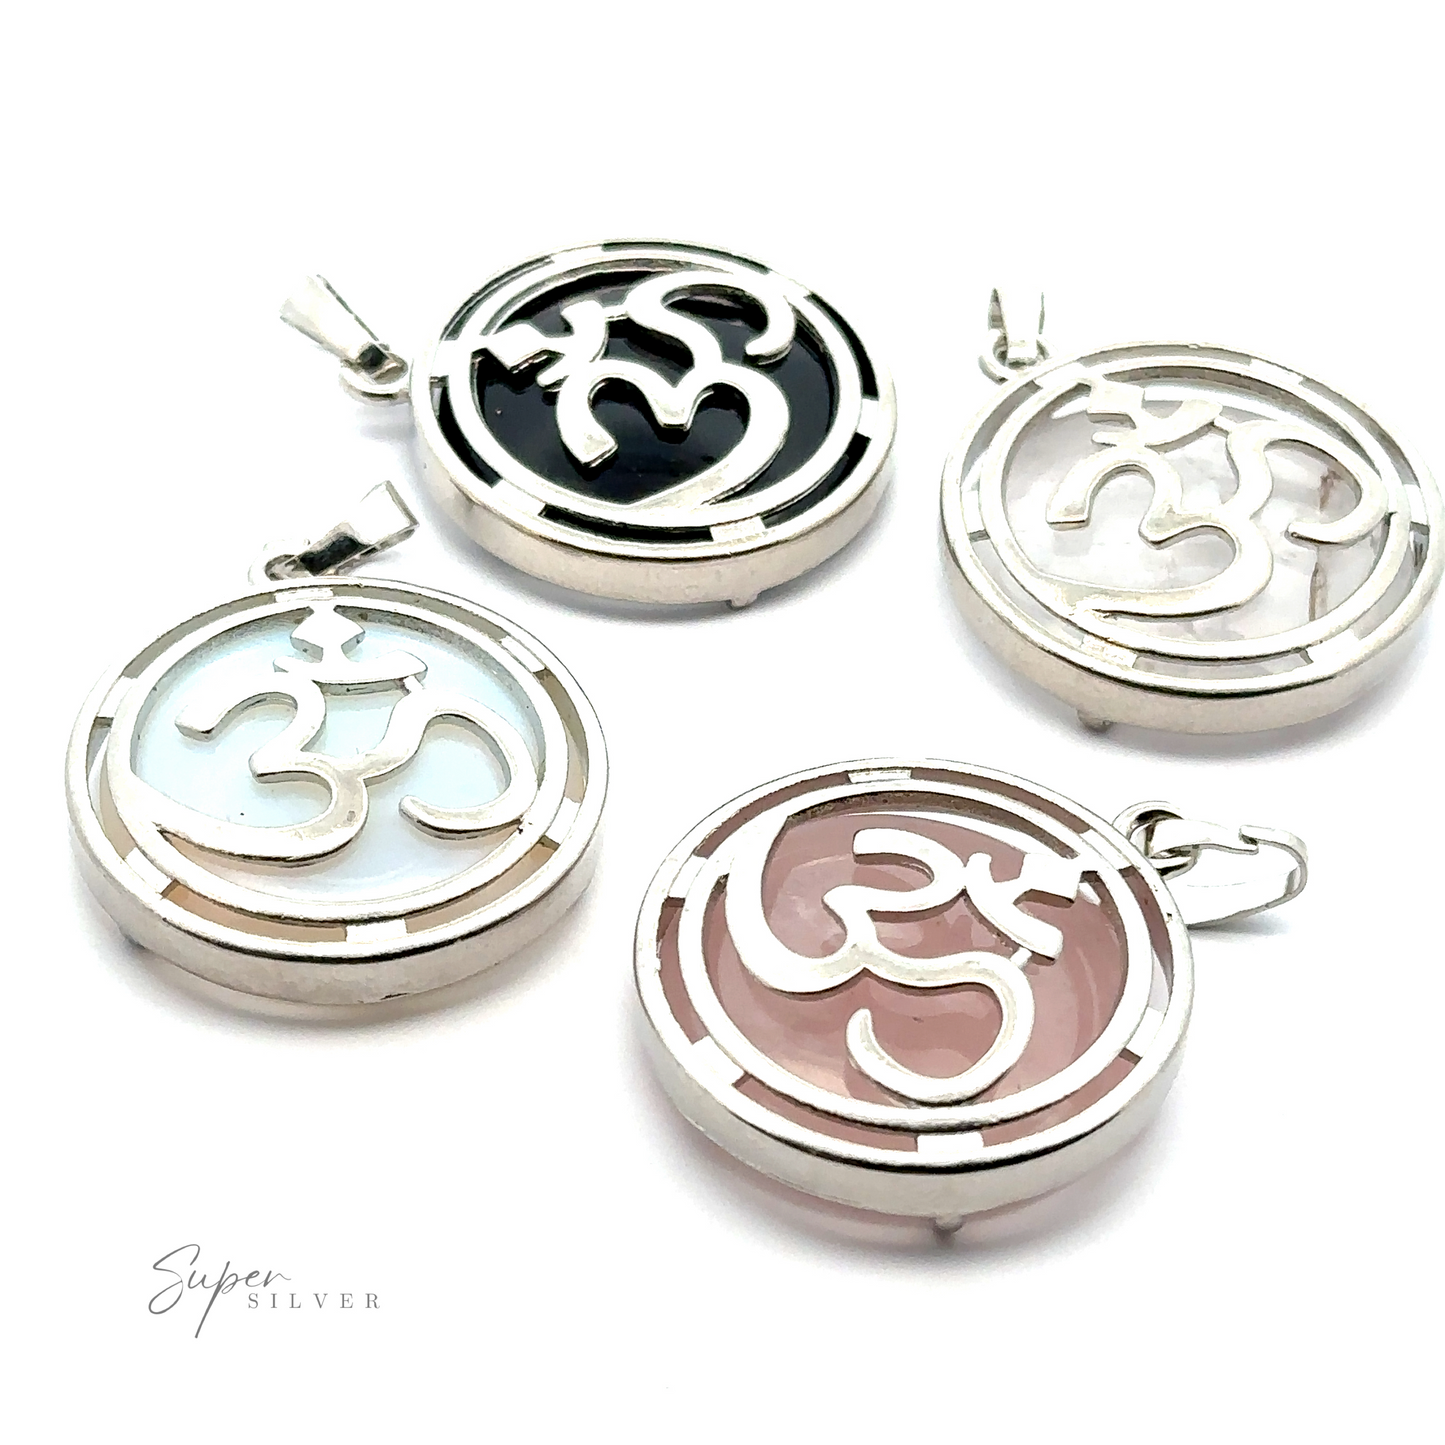 Four Om Pendants, each featuring a silver plated Om symbol against backgrounds of black, white, pink, and light blue. Arranged on a white surface with "Super Silver" inscribed at the bottom left corner, these mixed metals pieces add a touch of elegance.